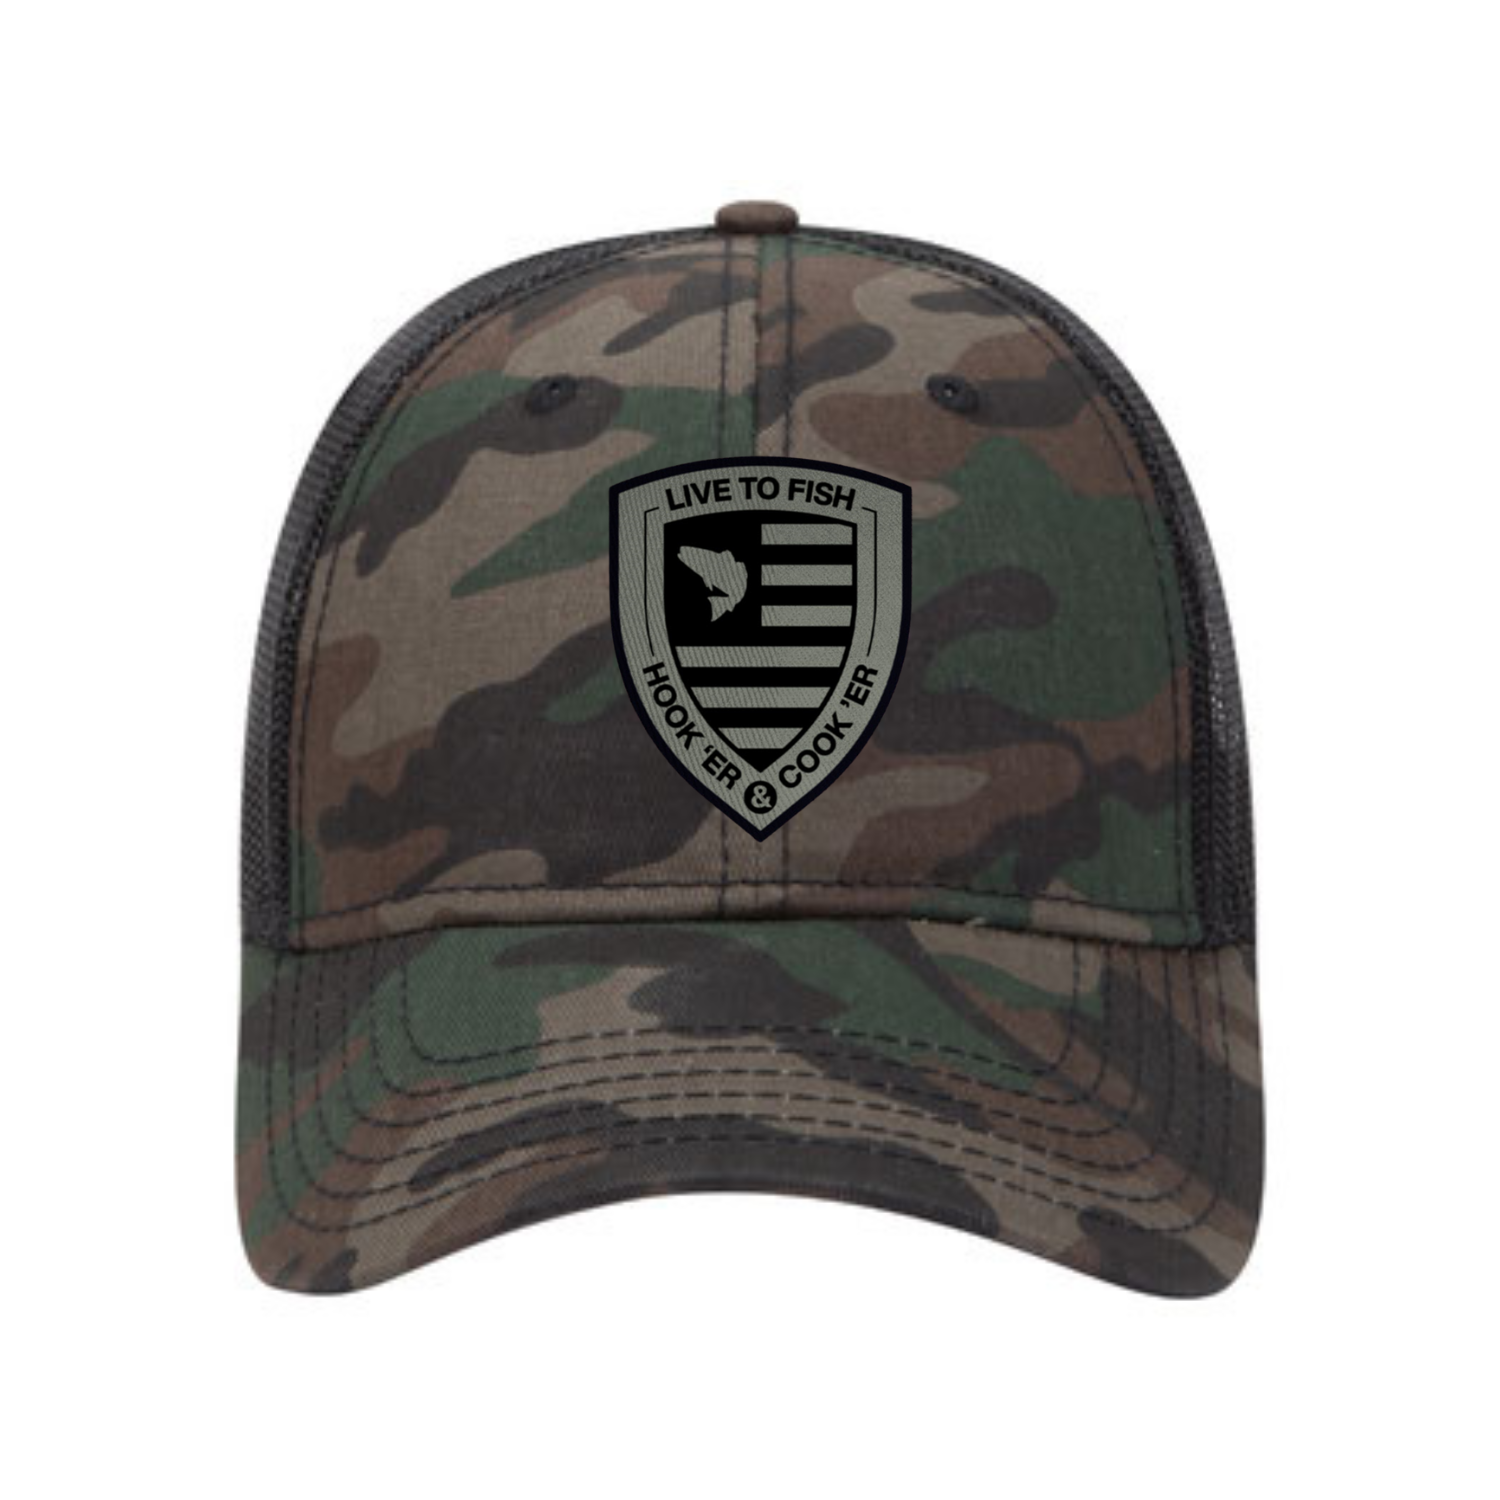 Tactical Bass Shield 6 Panel Cotton Twill Pro-Style Snap Back Trucker Hat